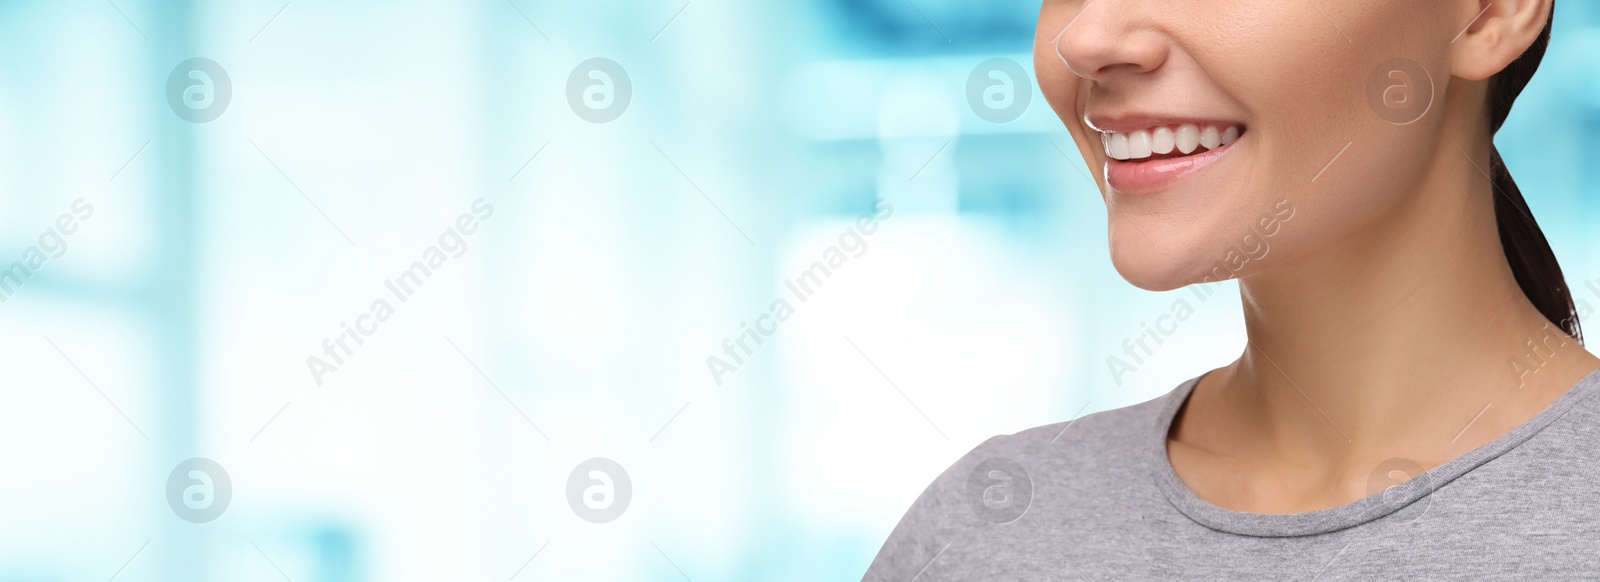 Image of Woman with clean teeth smiling on blurred background, closeup. Banner design with space for text